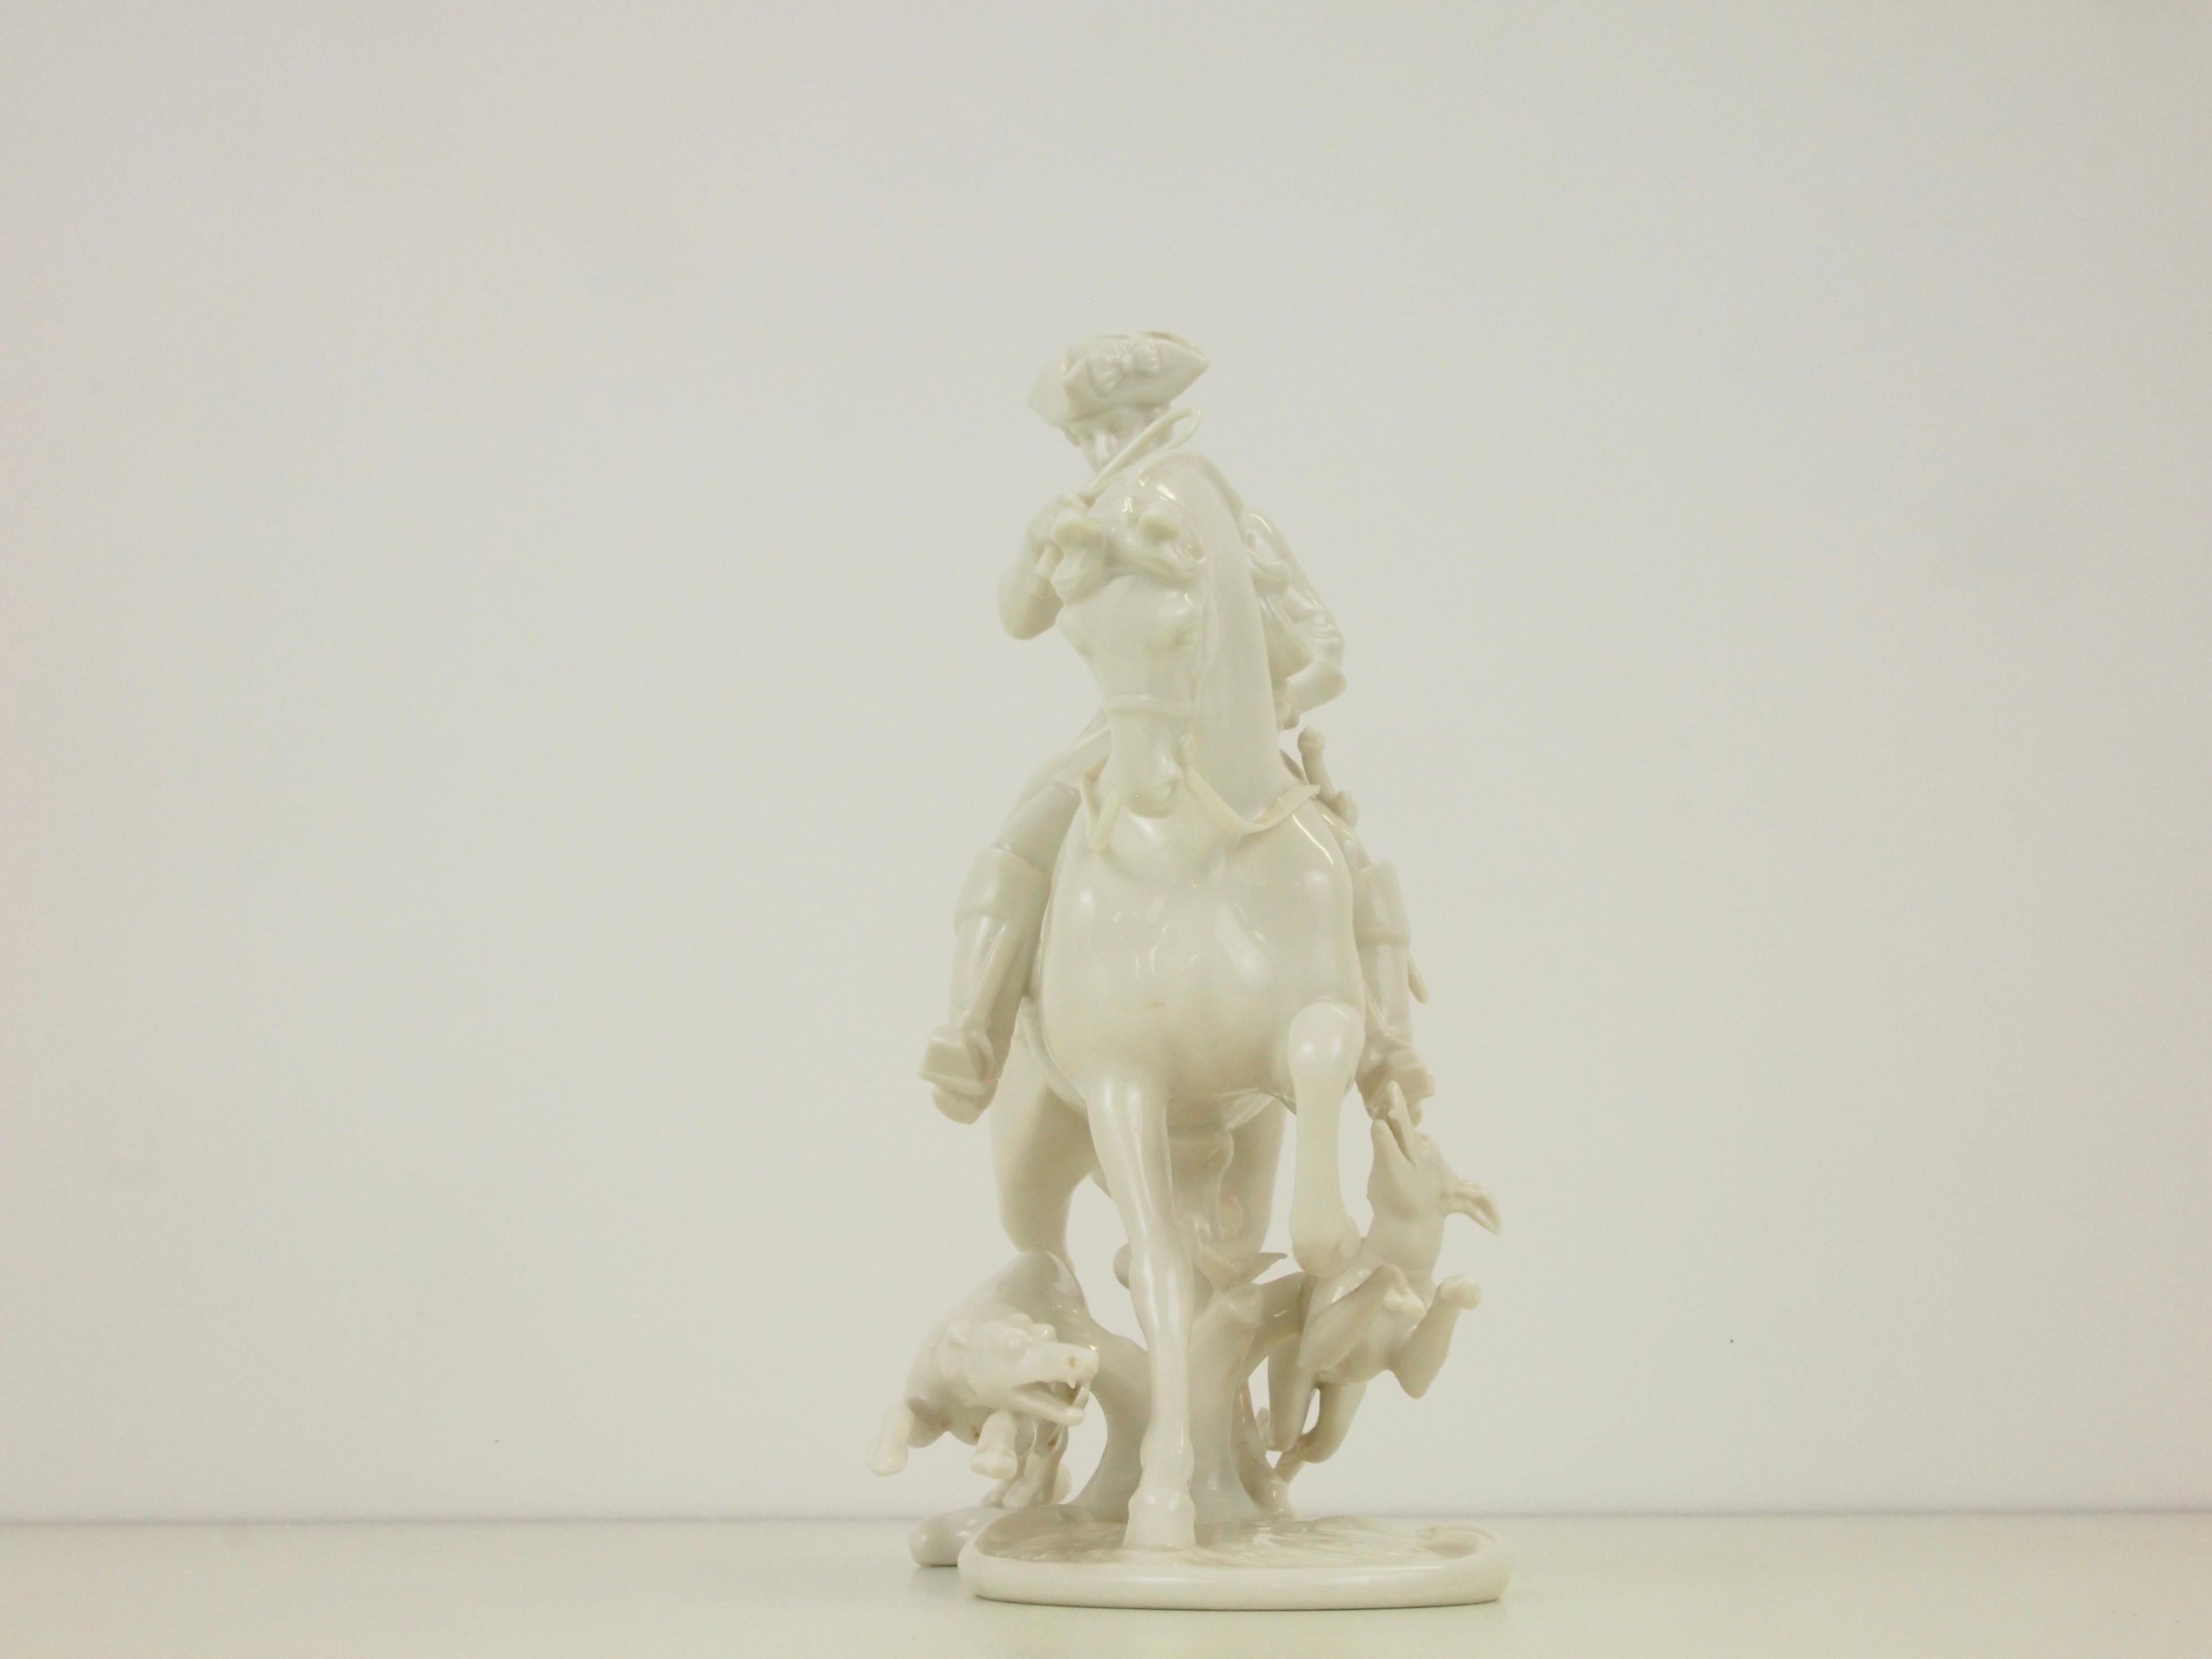 Nymphenburg Porcelain Figurine Depicting a Horse Rider in a Hunting Scene For Sale 1